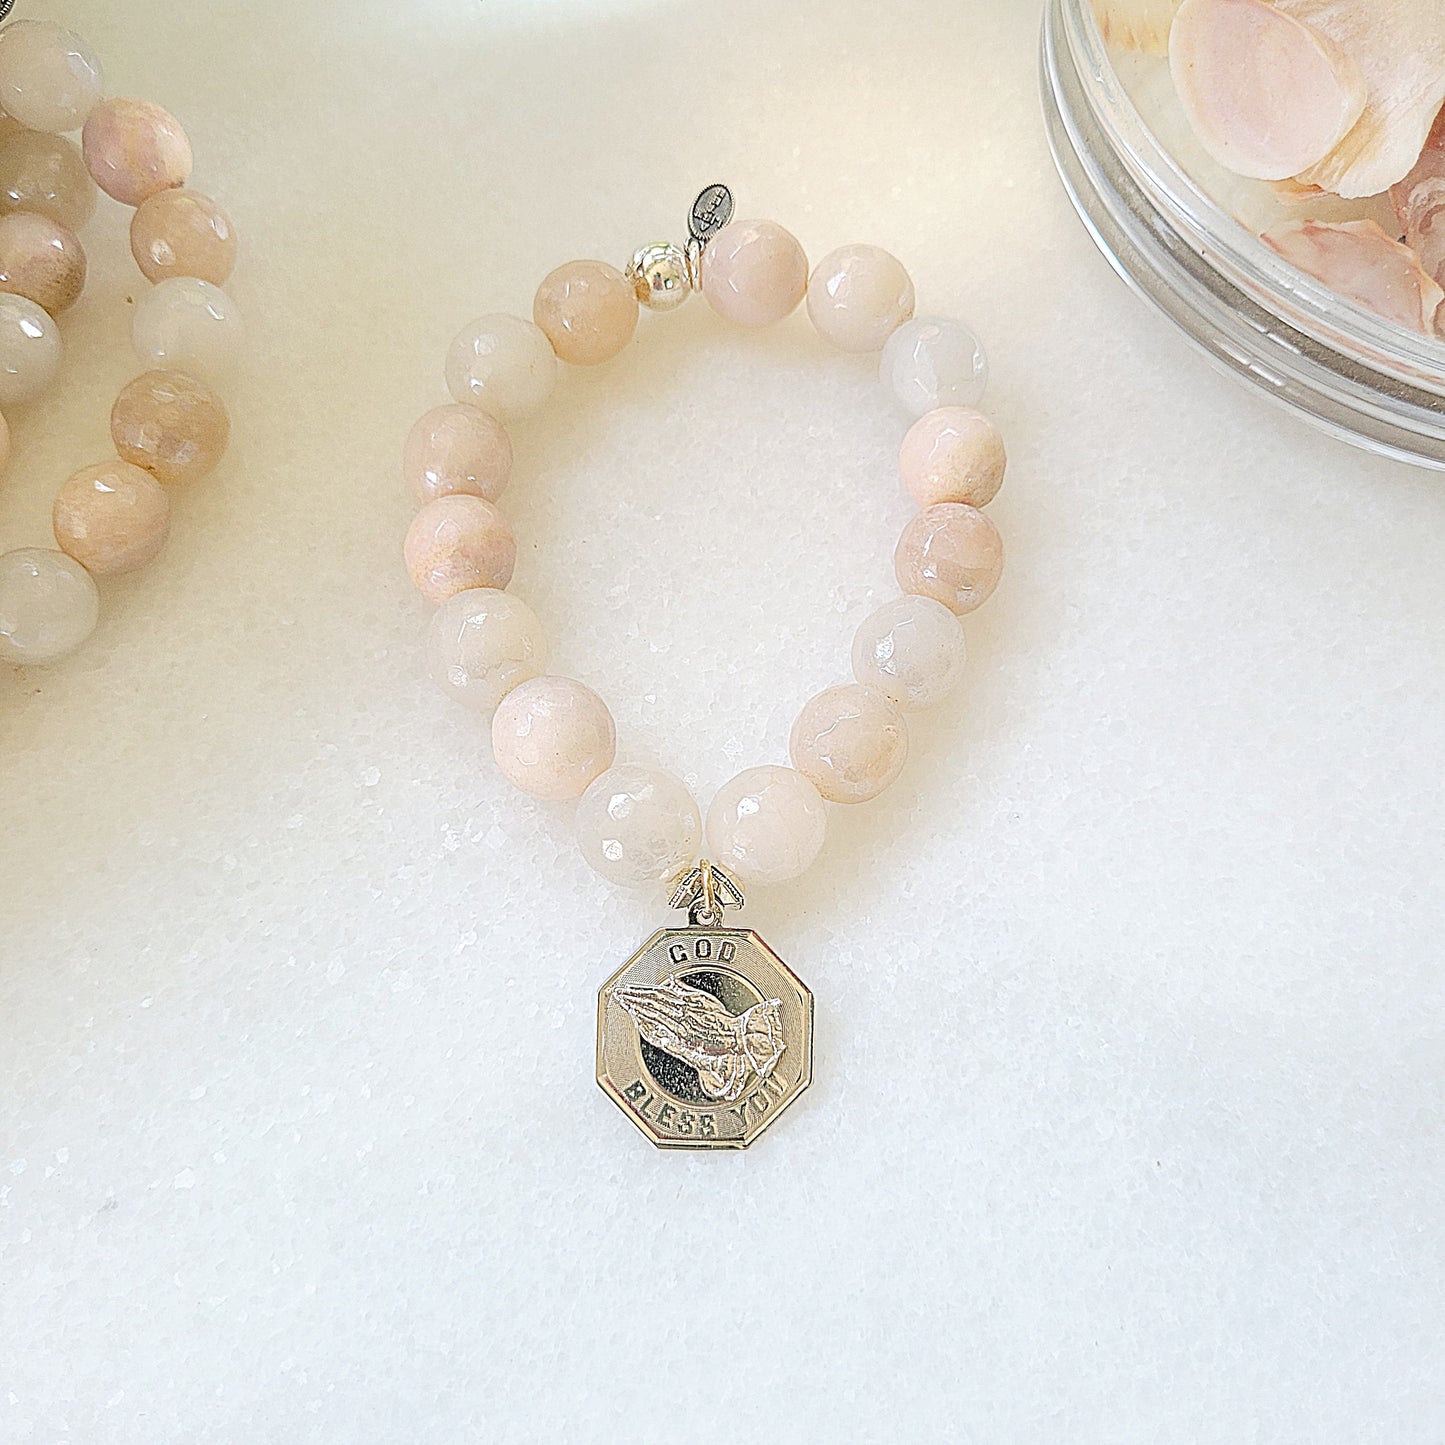 Peach Moonstone Faceted 12mm Beaded Bracelet w/ Prayer Hands "God Bless You" Medal - Afterlife Jewelry Designs